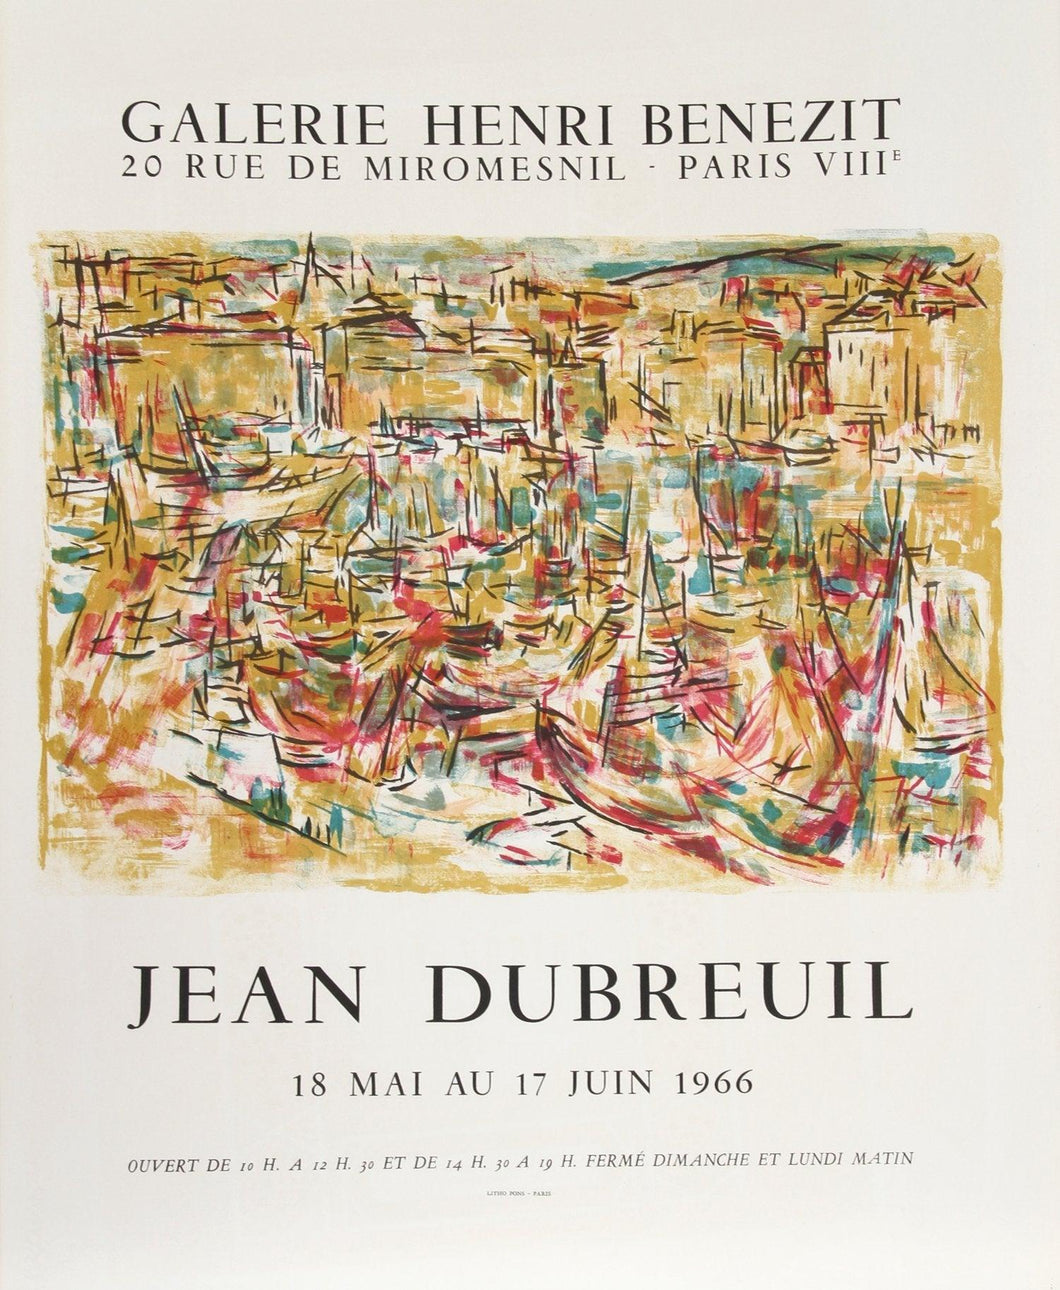 Exhibition Galerie Henri Benzit Poster | Jean Dubreuil,{{product.type}}